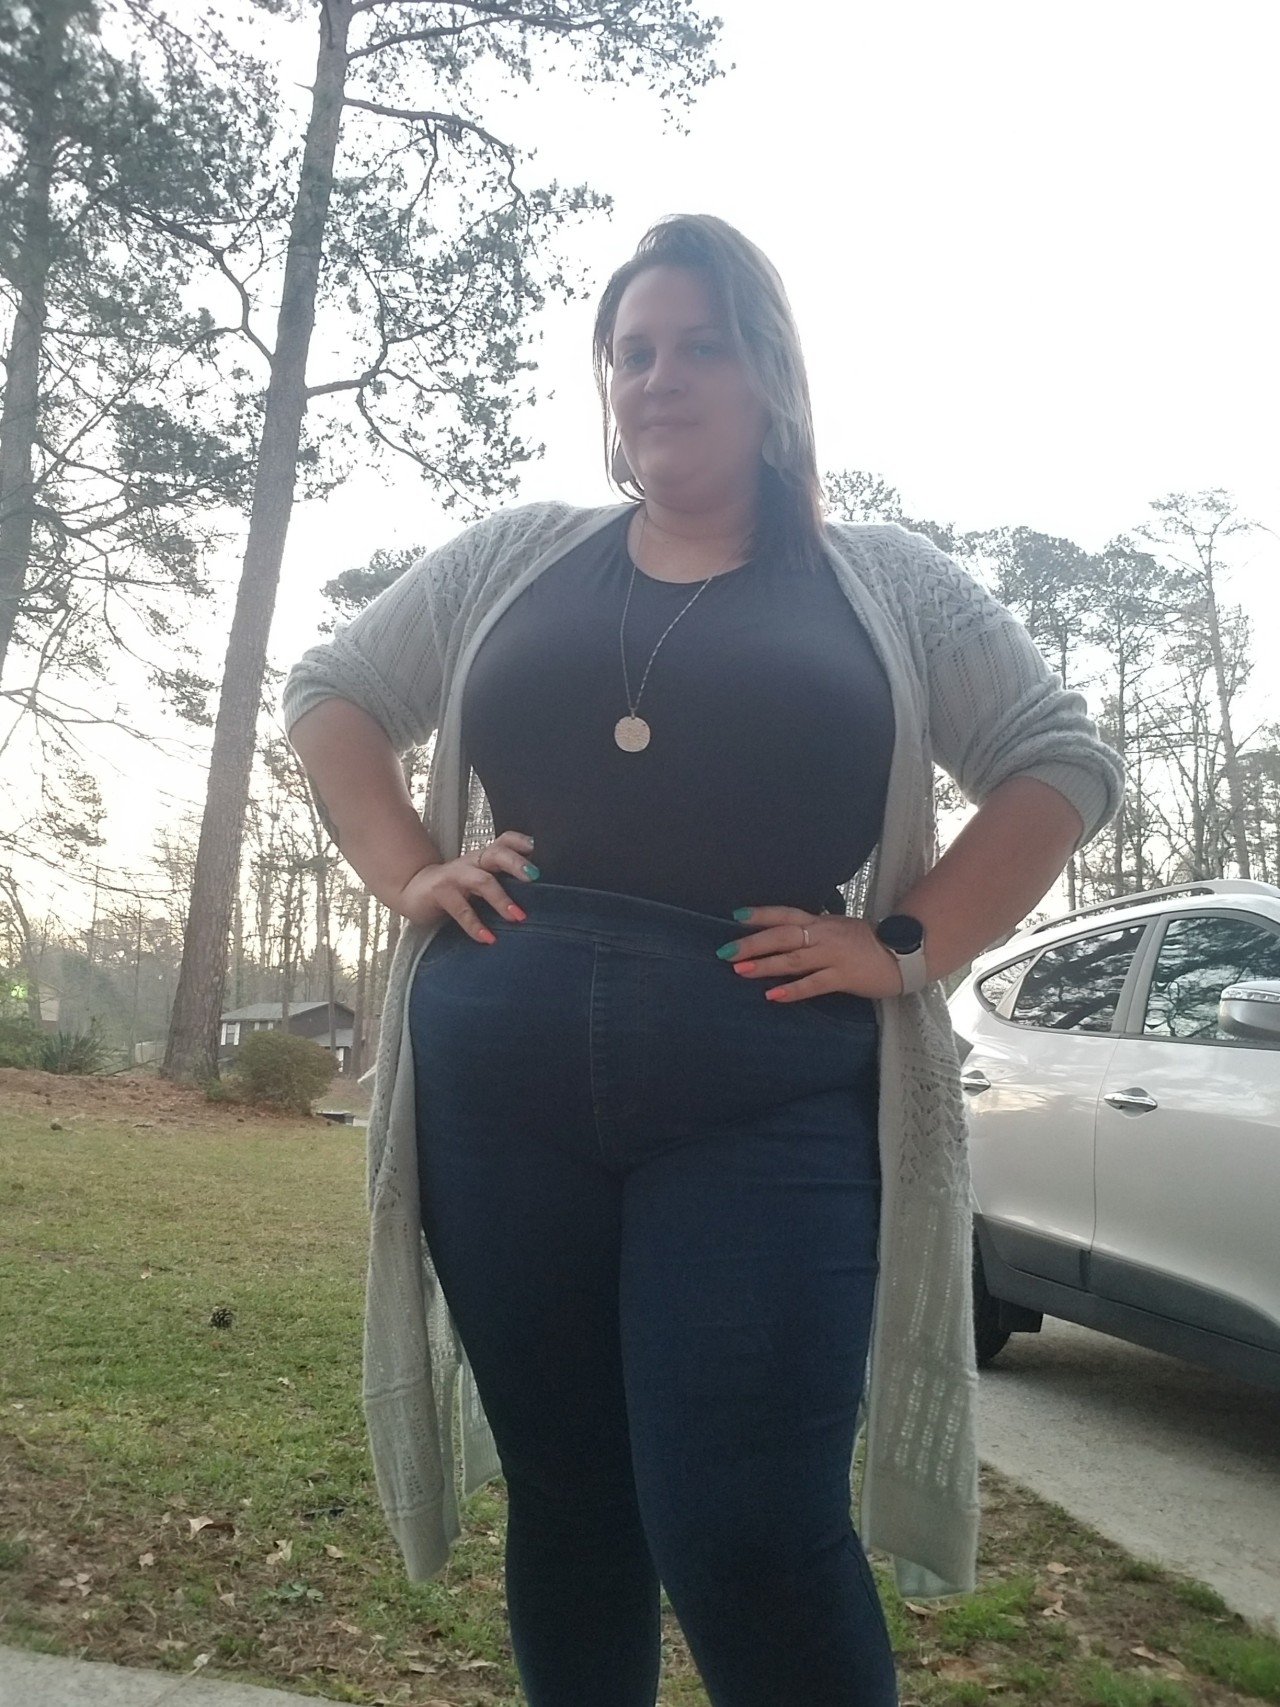 gory-mermaid:Out of my comfort zone with a shirt tucked into my jeans.  Mom jeans looking hot 